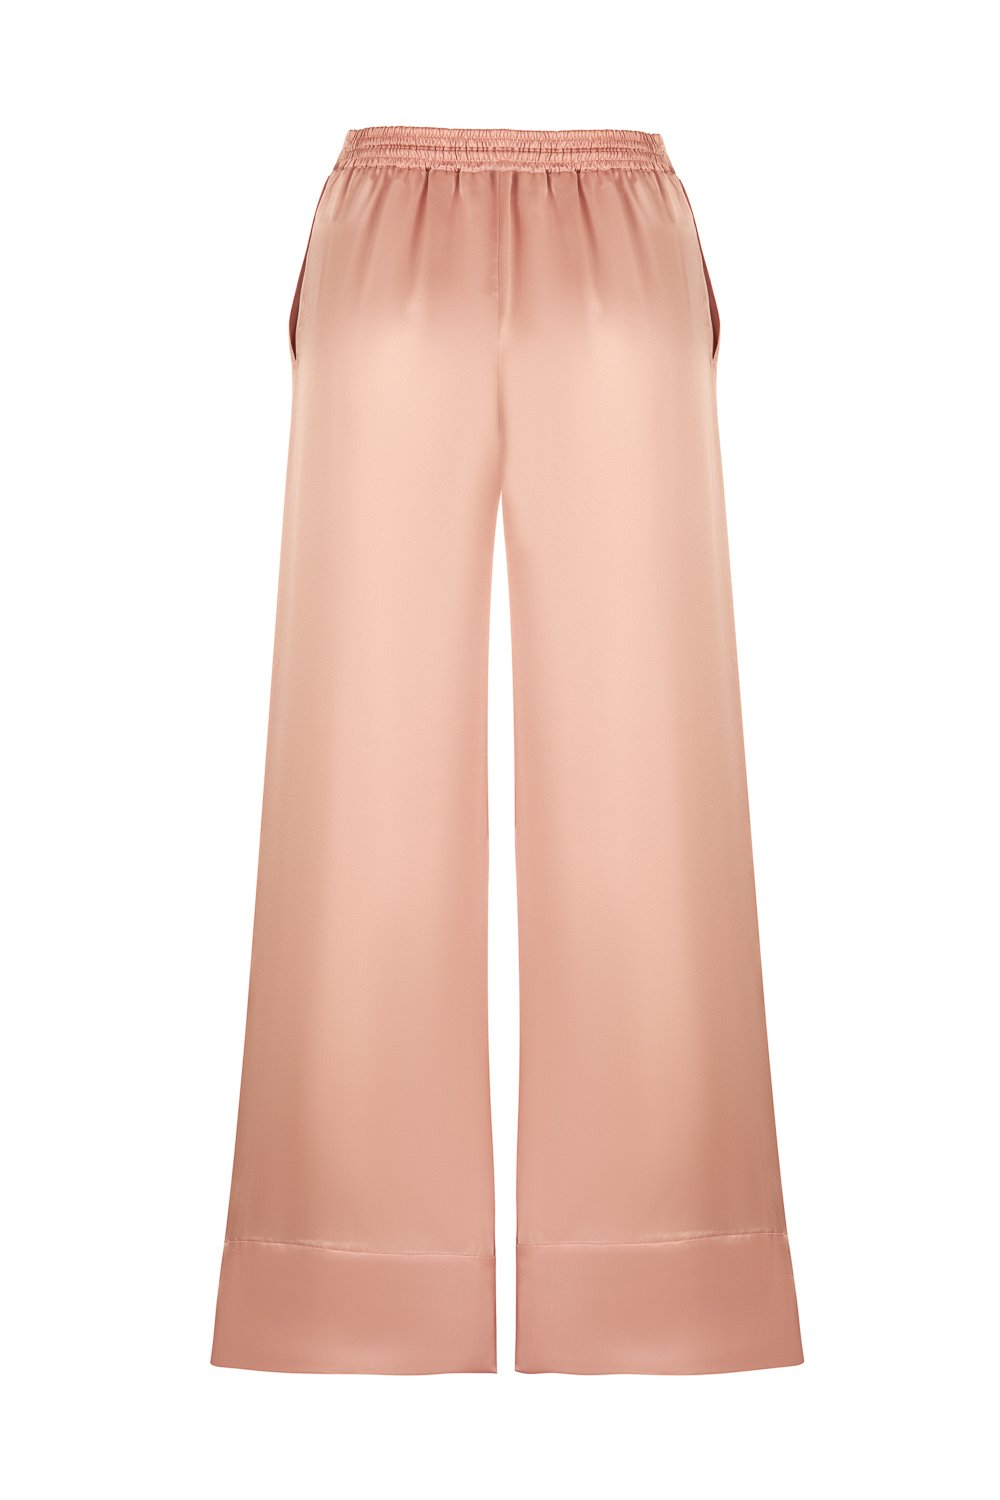 Palazzo Style Silk Pants in Shell Pink